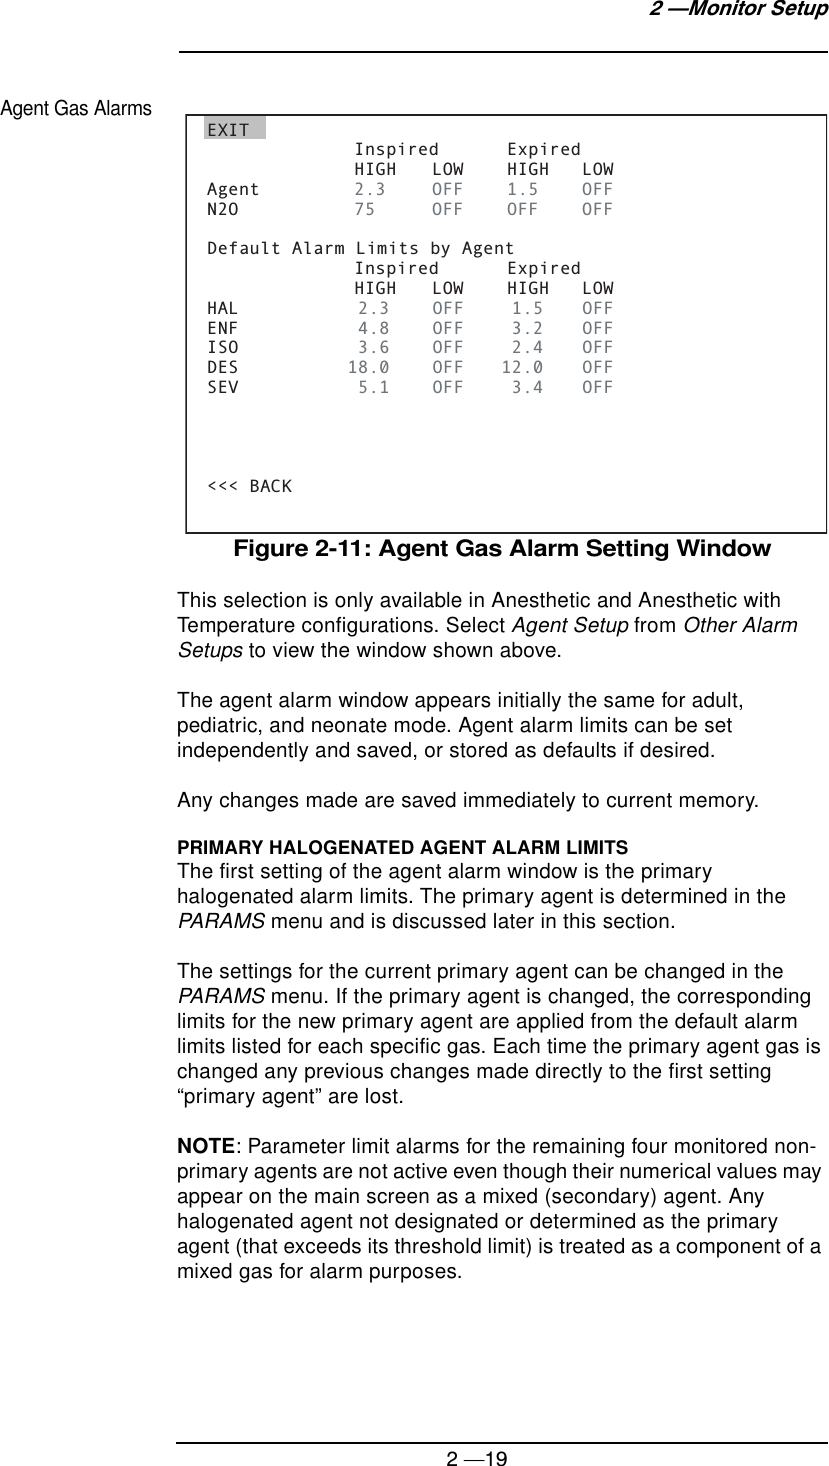 2 —192 —Monitor SetupAgent Gas AlarmsFigure 2-11: Agent Gas Alarm Setting WindowThis selection is only available in Anesthetic and Anesthetic with Temperature configurations. Select Agent Setup from Other Alarm Setups to view the window shown above.The agent alarm window appears initially the same for adult, pediatric, and neonate mode. Agent alarm limits can be set independently and saved, or stored as defaults if desired.Any changes made are saved immediately to current memory.PRIMARY HALOGENATED AGENT ALARM LIMITSThe first setting of the agent alarm window is the primary halogenated alarm limits. The primary agent is determined in the PARAMS menu and is discussed later in this section.The settings for the current primary agent can be changed in the PARAMS menu. If the primary agent is changed, the corresponding limits for the new primary agent are applied from the default alarm limits listed for each specific gas. Each time the primary agent gas is changed any previous changes made directly to the first setting “primary agent” are lost.NOTE: Parameter limit alarms for the remaining four monitored non-primary agents are not active even though their numerical values may appear on the main screen as a mixed (secondary) agent. Any halogenated agent not designated or determined as the primary agent (that exceeds its threshold limit) is treated as a component of a mixed gas for alarm purposes.EXIT   Inspired  Expired    HIGH  LOW  HIGH  LOWAgent  2.3  OFF 1.5 OFFN2O  75  OFF OFF OFFDefault Alarm Limits by Agent   Inspired  Expired    HIGH  LOW  HIGH  LOWHAL  2.3     OFF  1.5  OFFENF  4.8     OFF  3.2  OFFISO  3.6     OFF  2.4  OFFDES          18.0     OFF  12.0  OFFSEV  5.1     OFF  3.4  OFF&lt;&lt;&lt; BACK 